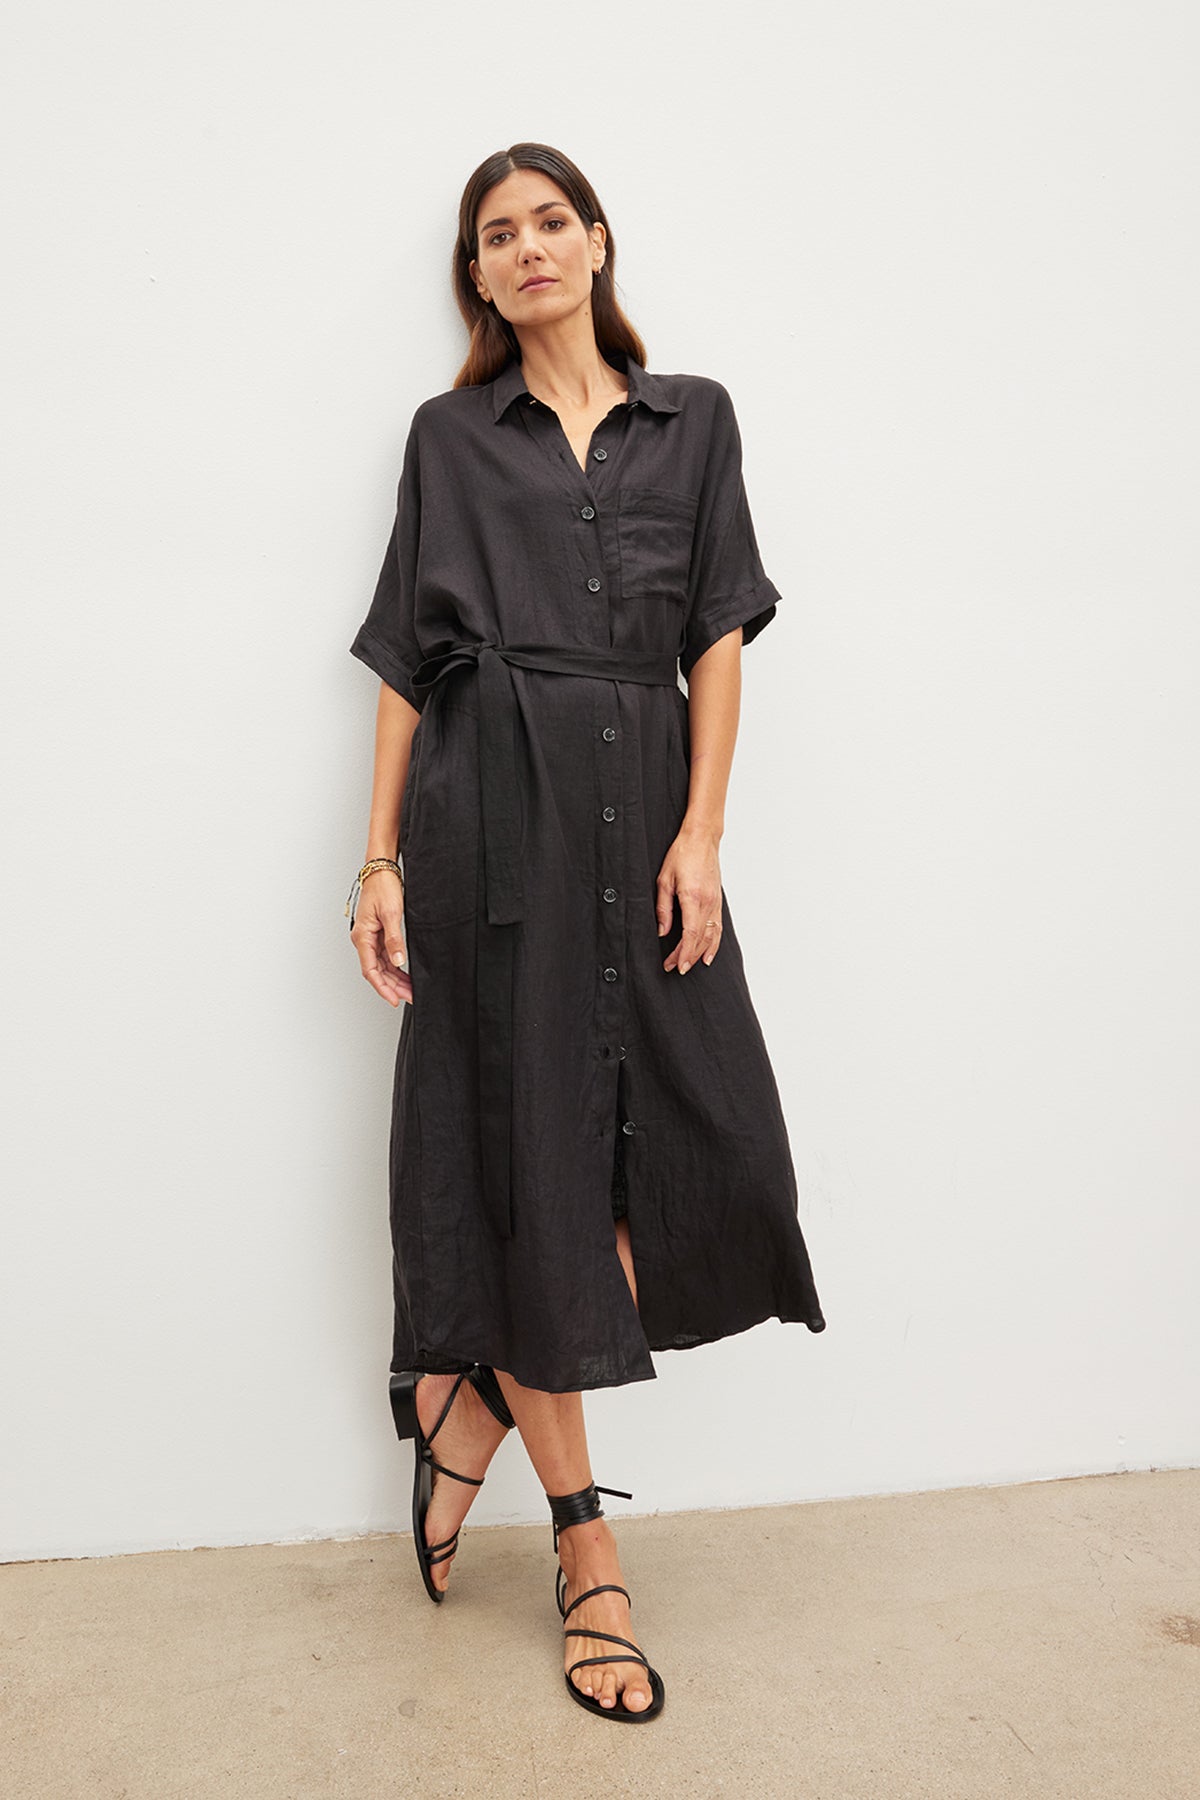   A woman stands against a white wall, wearing a black SANDRA LINEN BUTTON-UP DRESS by Velvet by Graham & Spencer with a detachable belt and black sandals. 